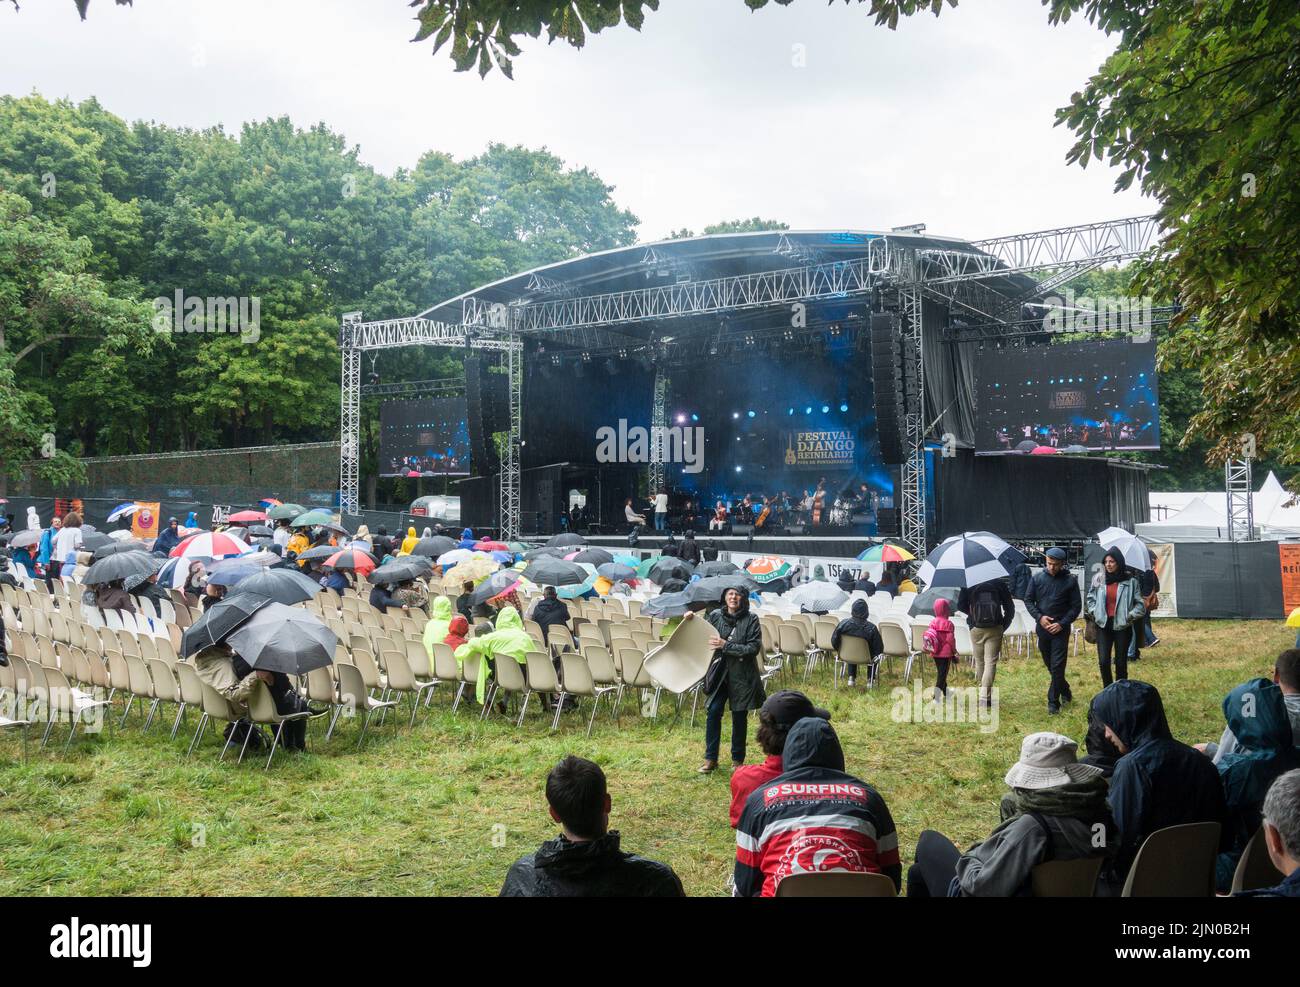 Main stage at Django Reinhardt Festival in Fontainebleau, France. Stock Photo